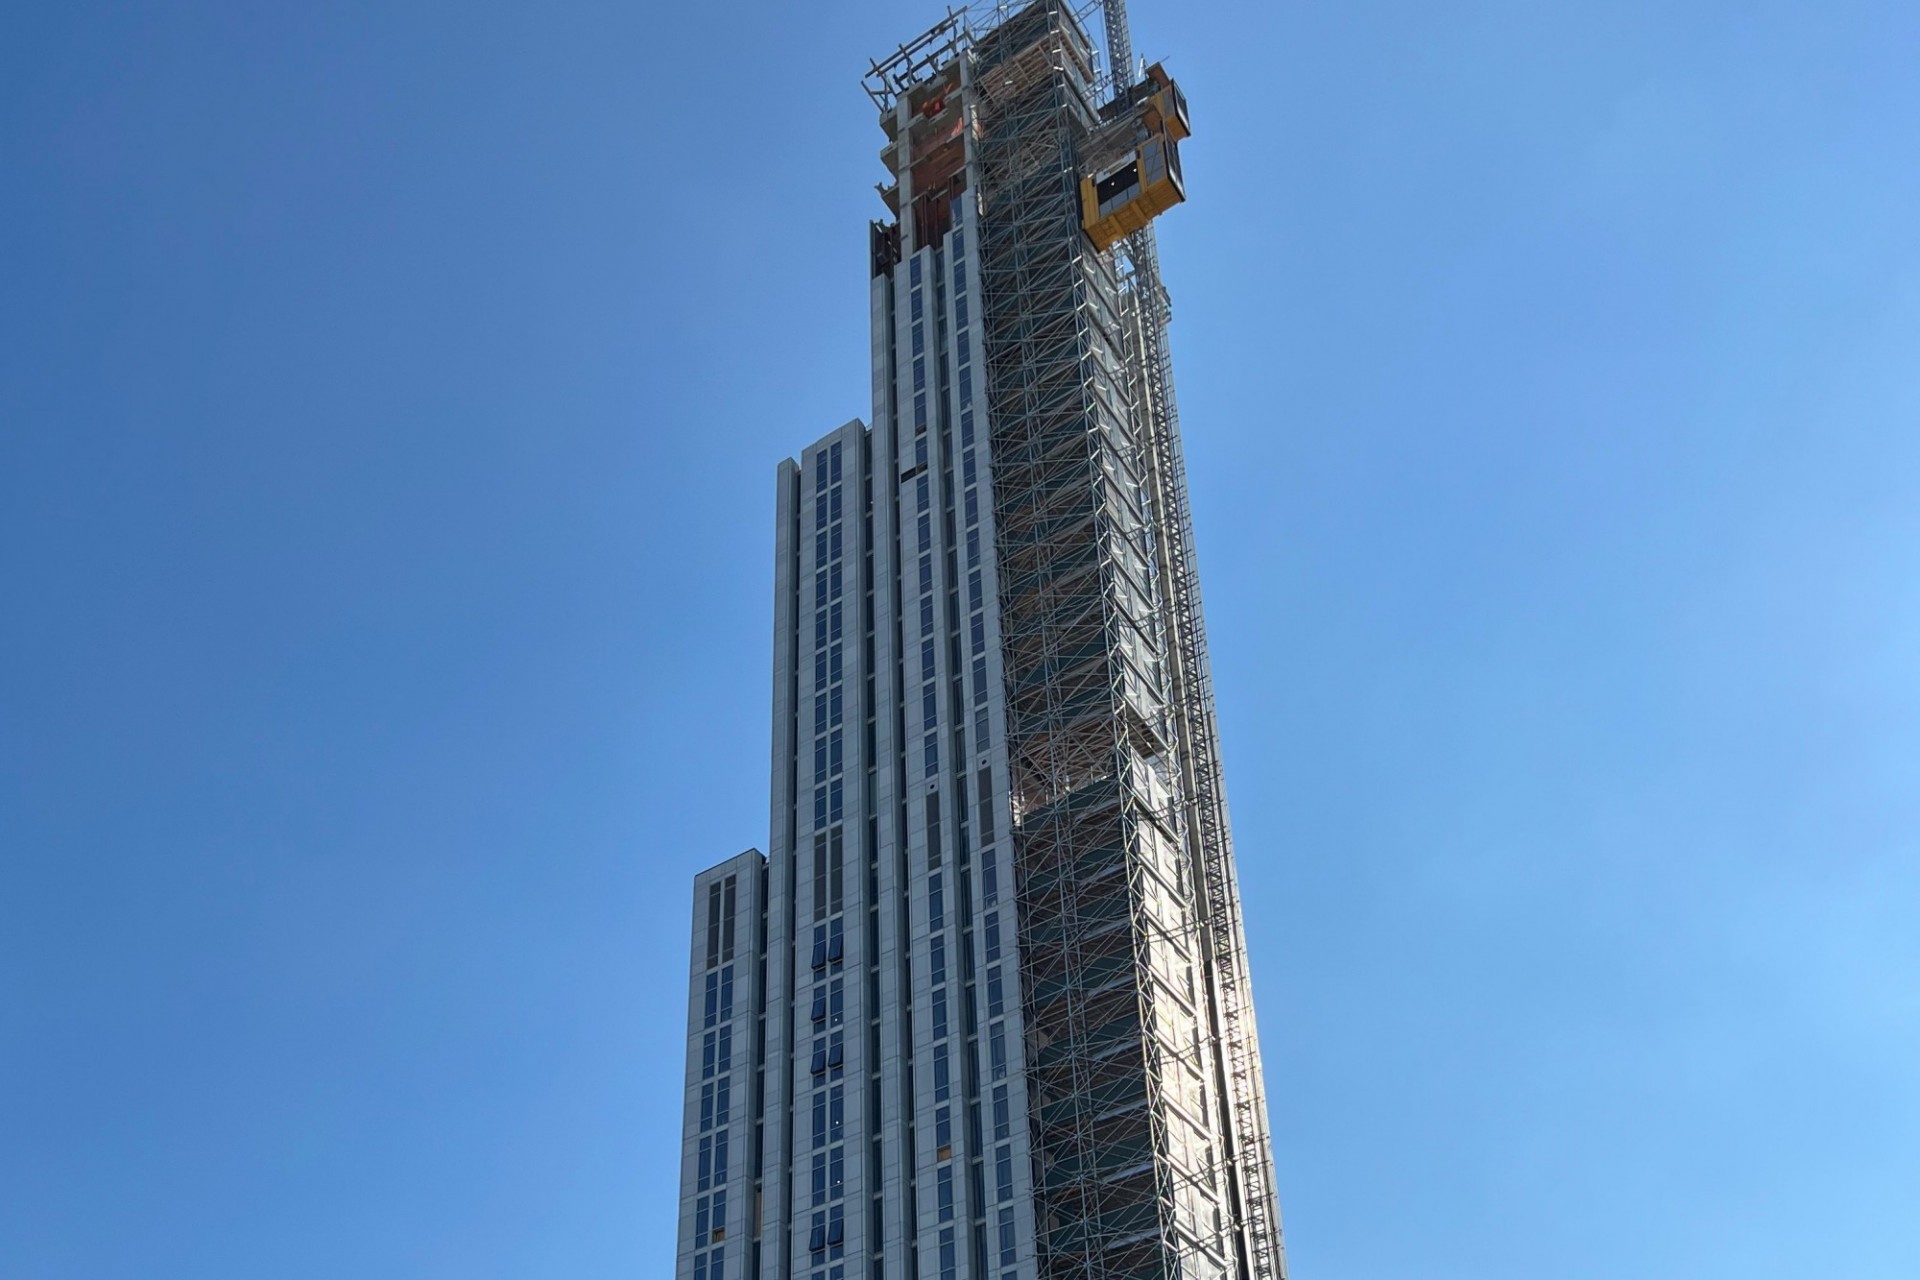 A view of the 600 W. 125th Street building that's currently under construction, looking south.